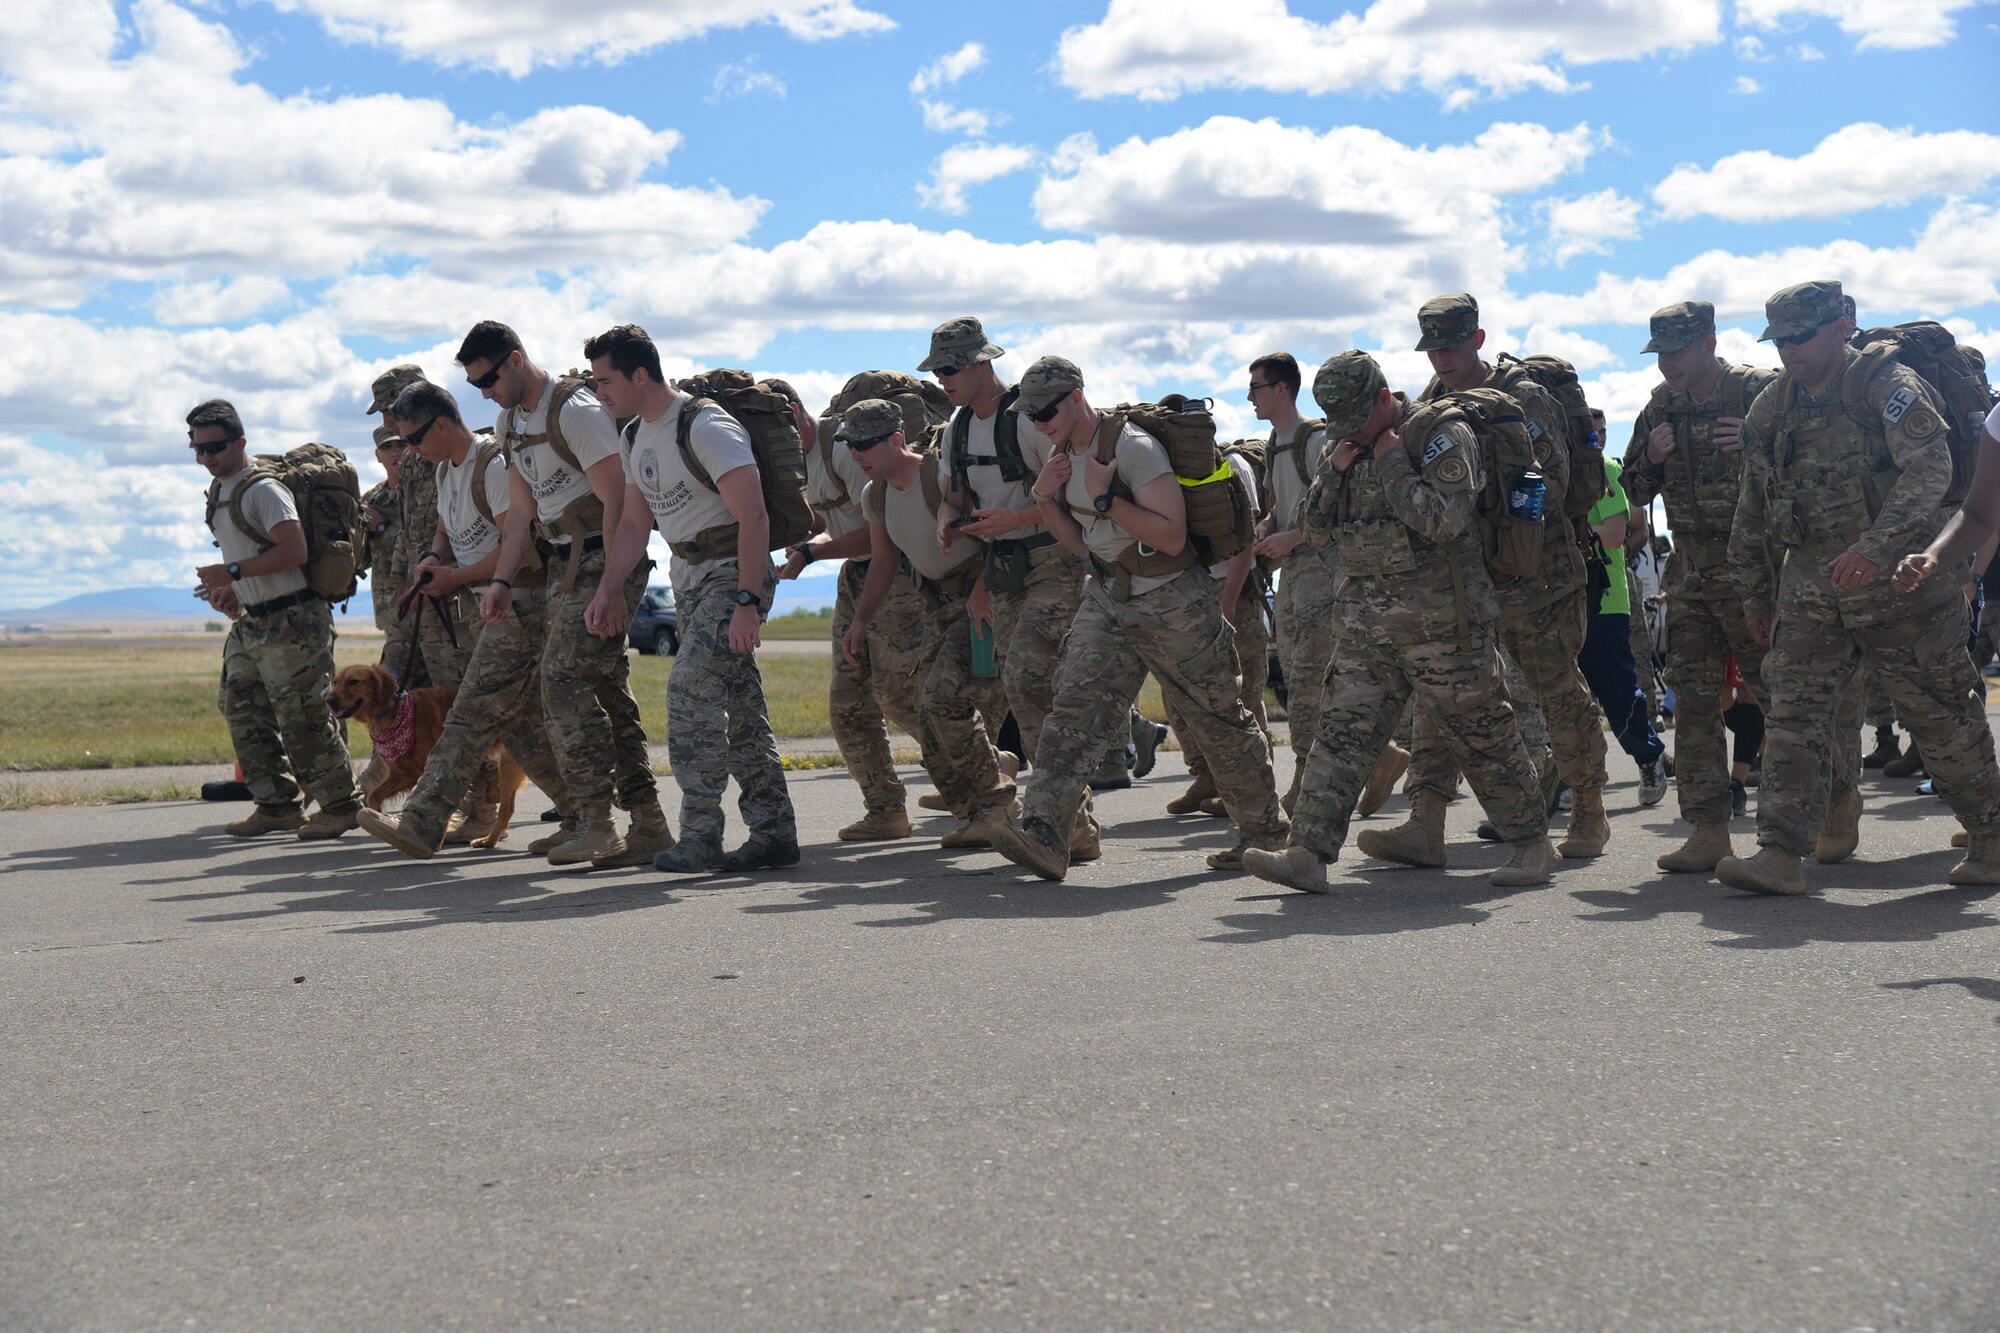 Airmen participate in a 9/11 Remembrance ruck Sept. 9, 2016, at Malmstrom Air Force Base, Mont. Malmstrom Airmen held a remembrance ceremony and run to honor and recognize those who passed on Sept. 11, 2001. (U.S. Air Force photo/Airman 1st Class Daniel Brosam)